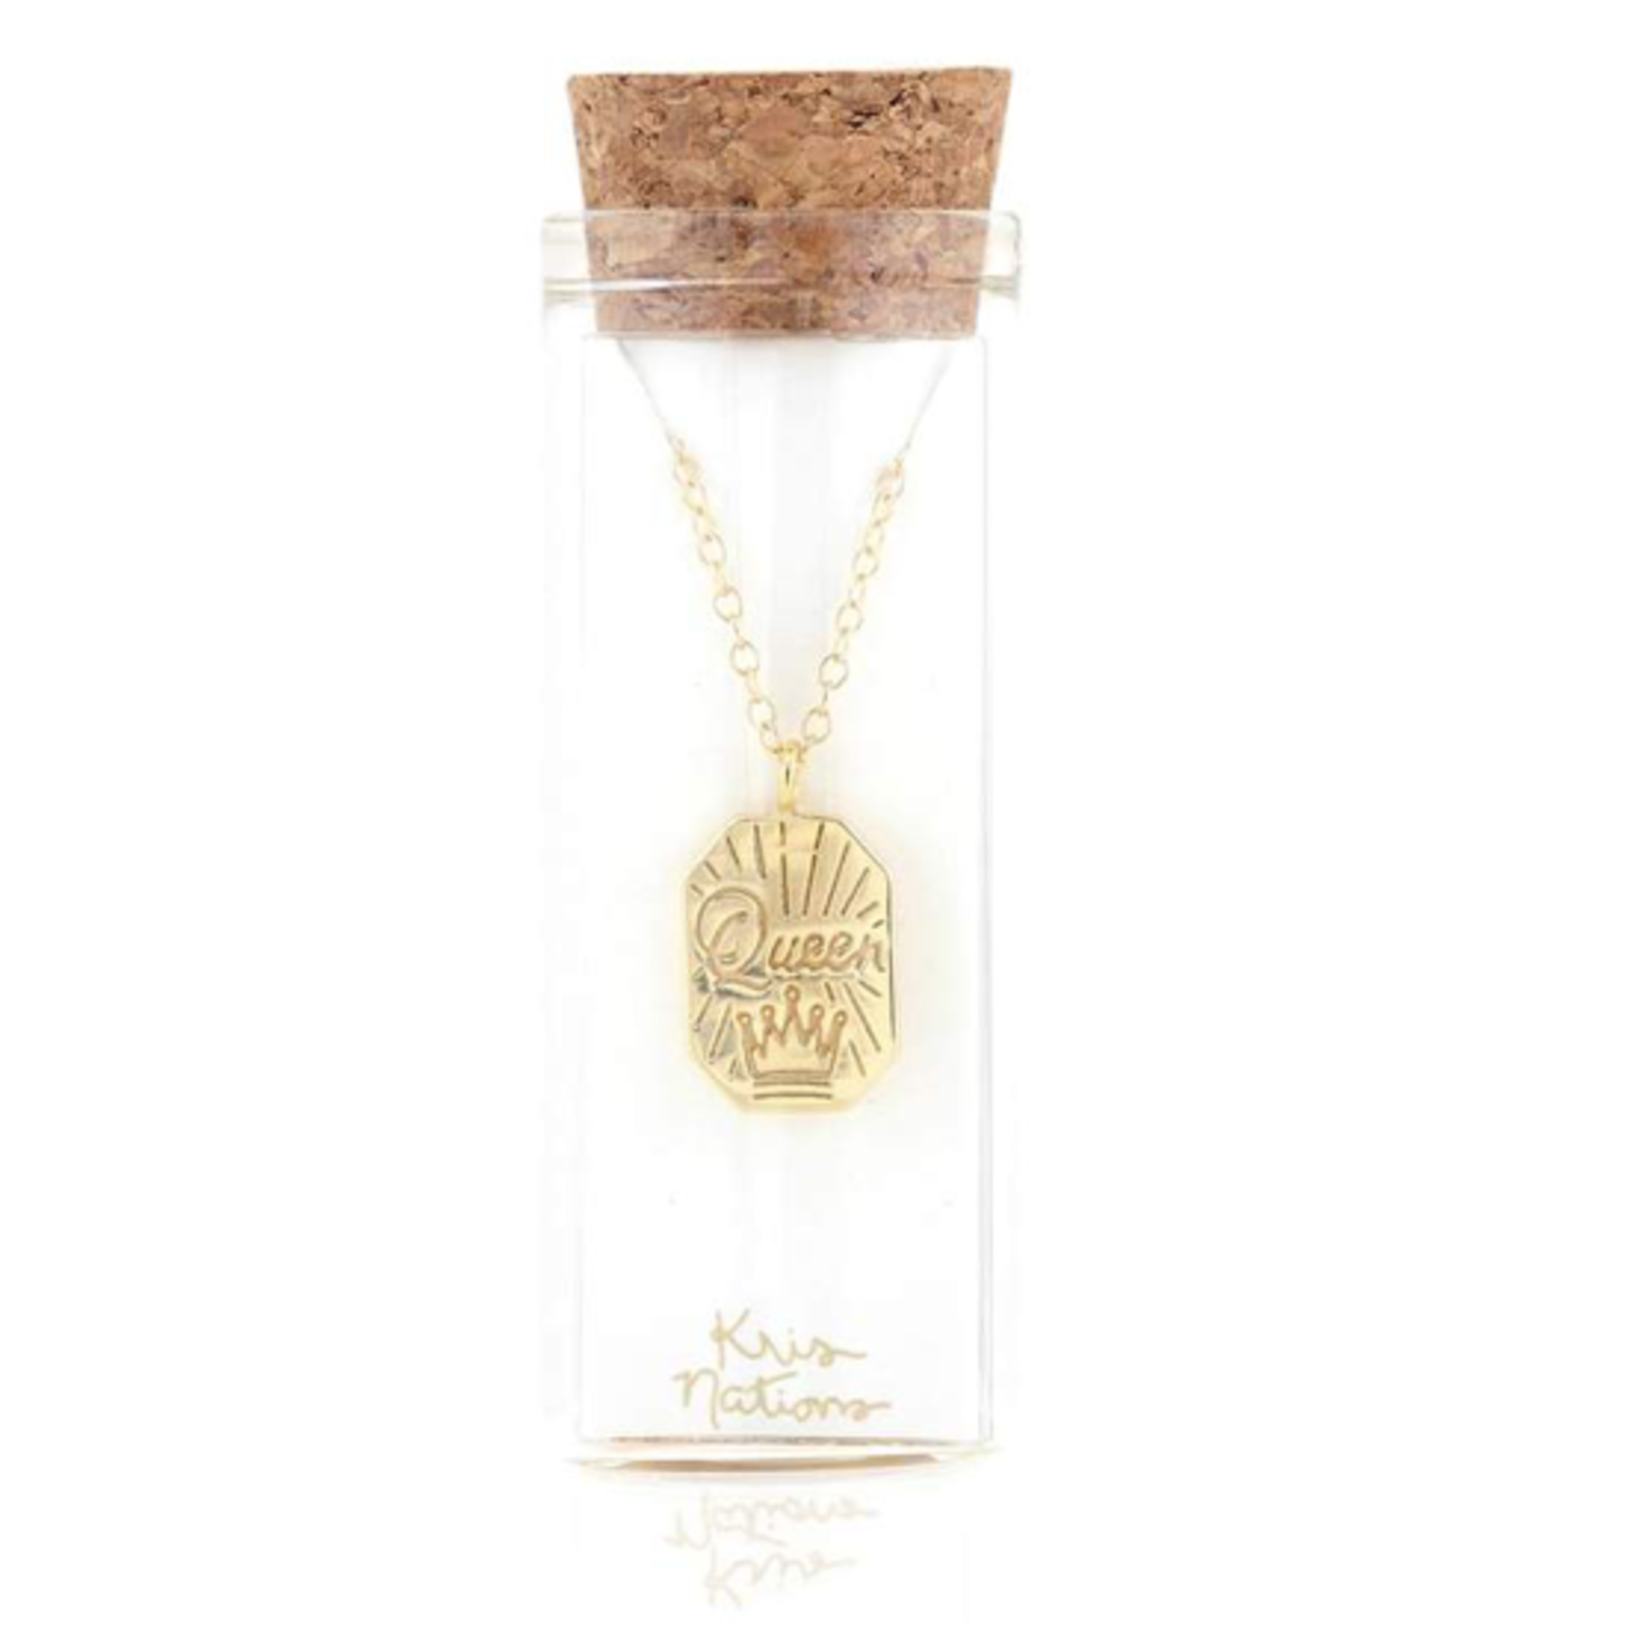 KRIS NATIONS Queen Dog Tag Charm Necklace